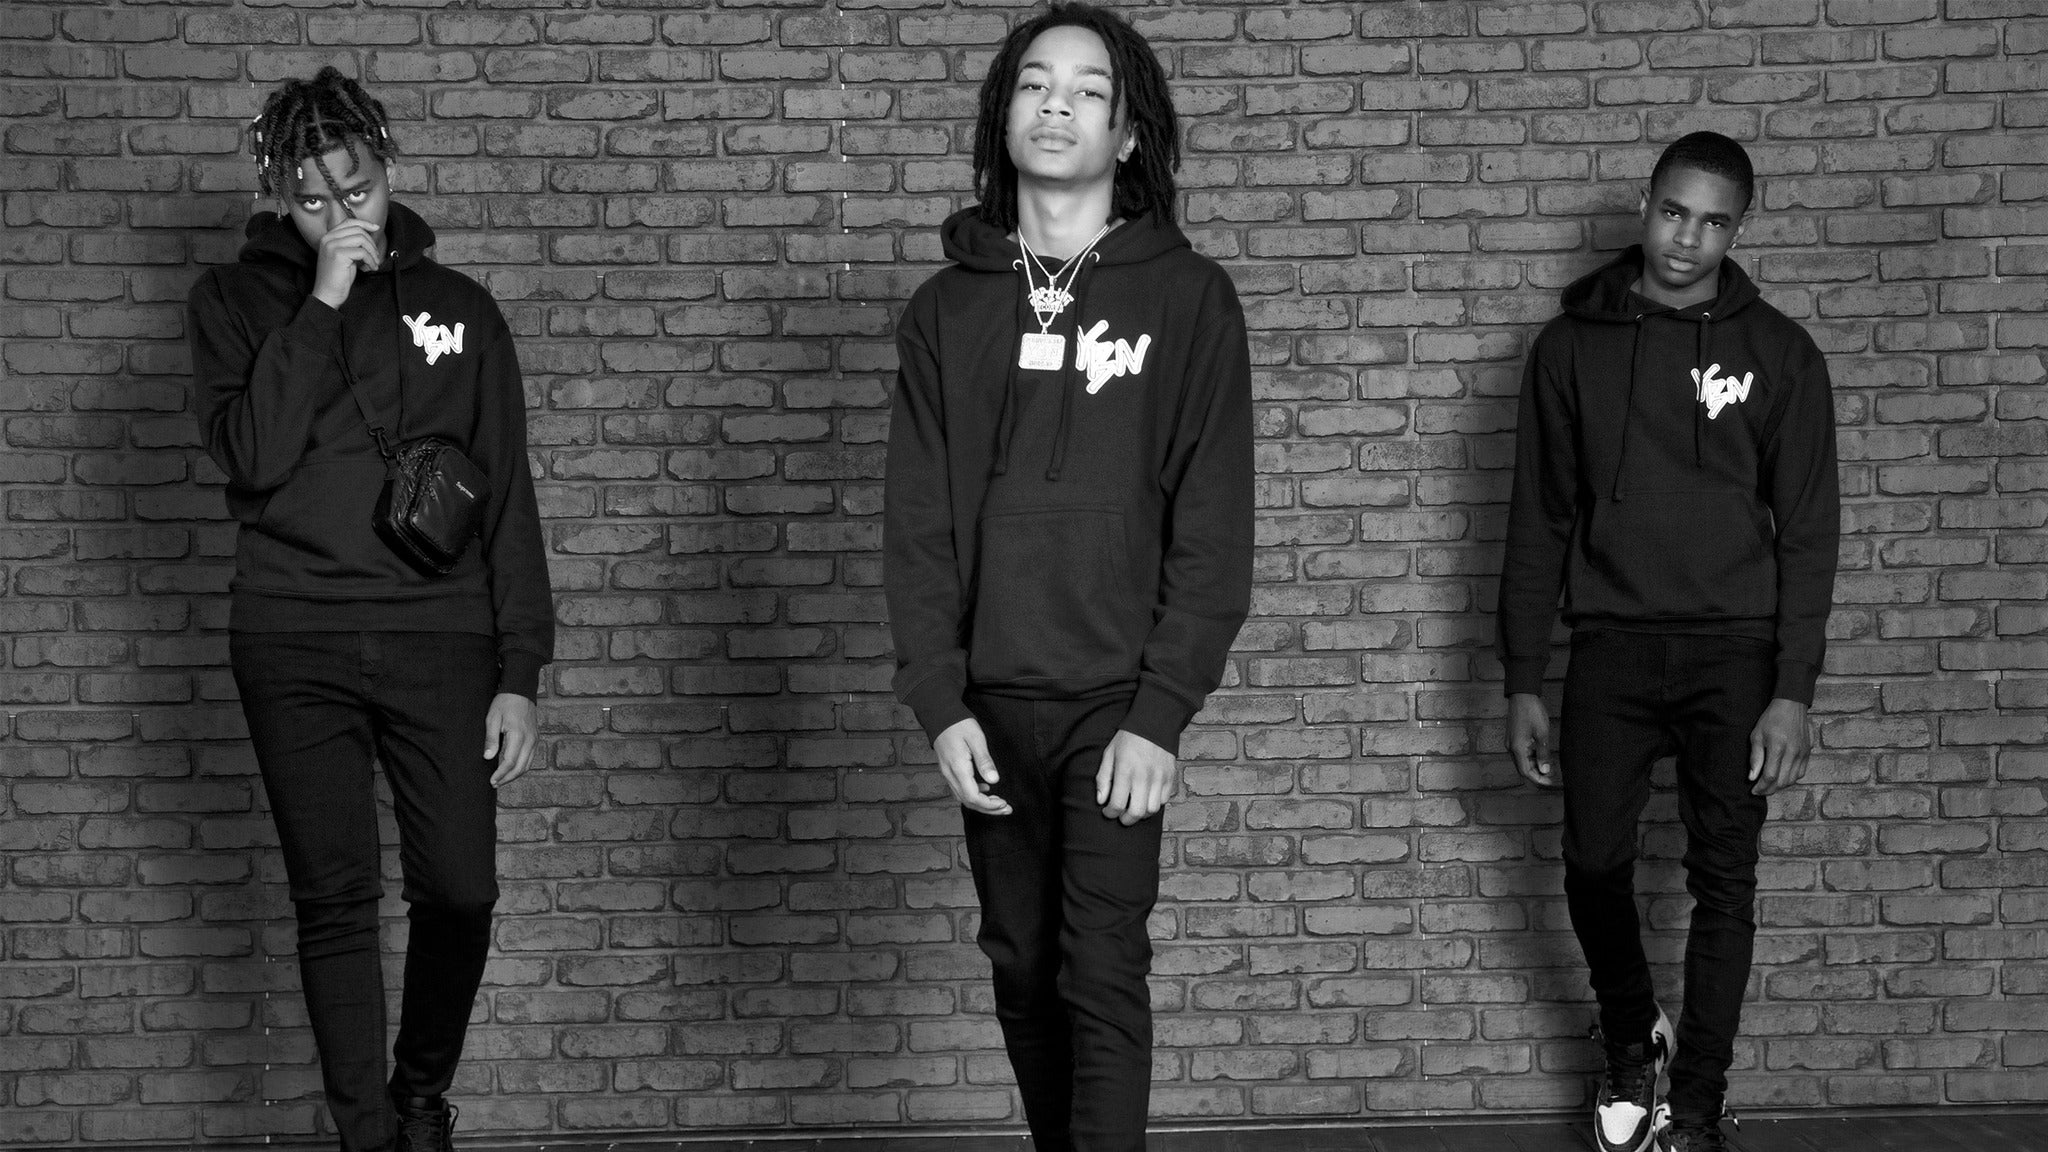 The YBN Takeover Tour With YBN Nahmir, YBN Almighty Jay, YBN Cordae in Los Angeles promo photo for Official Platinum presale offer code